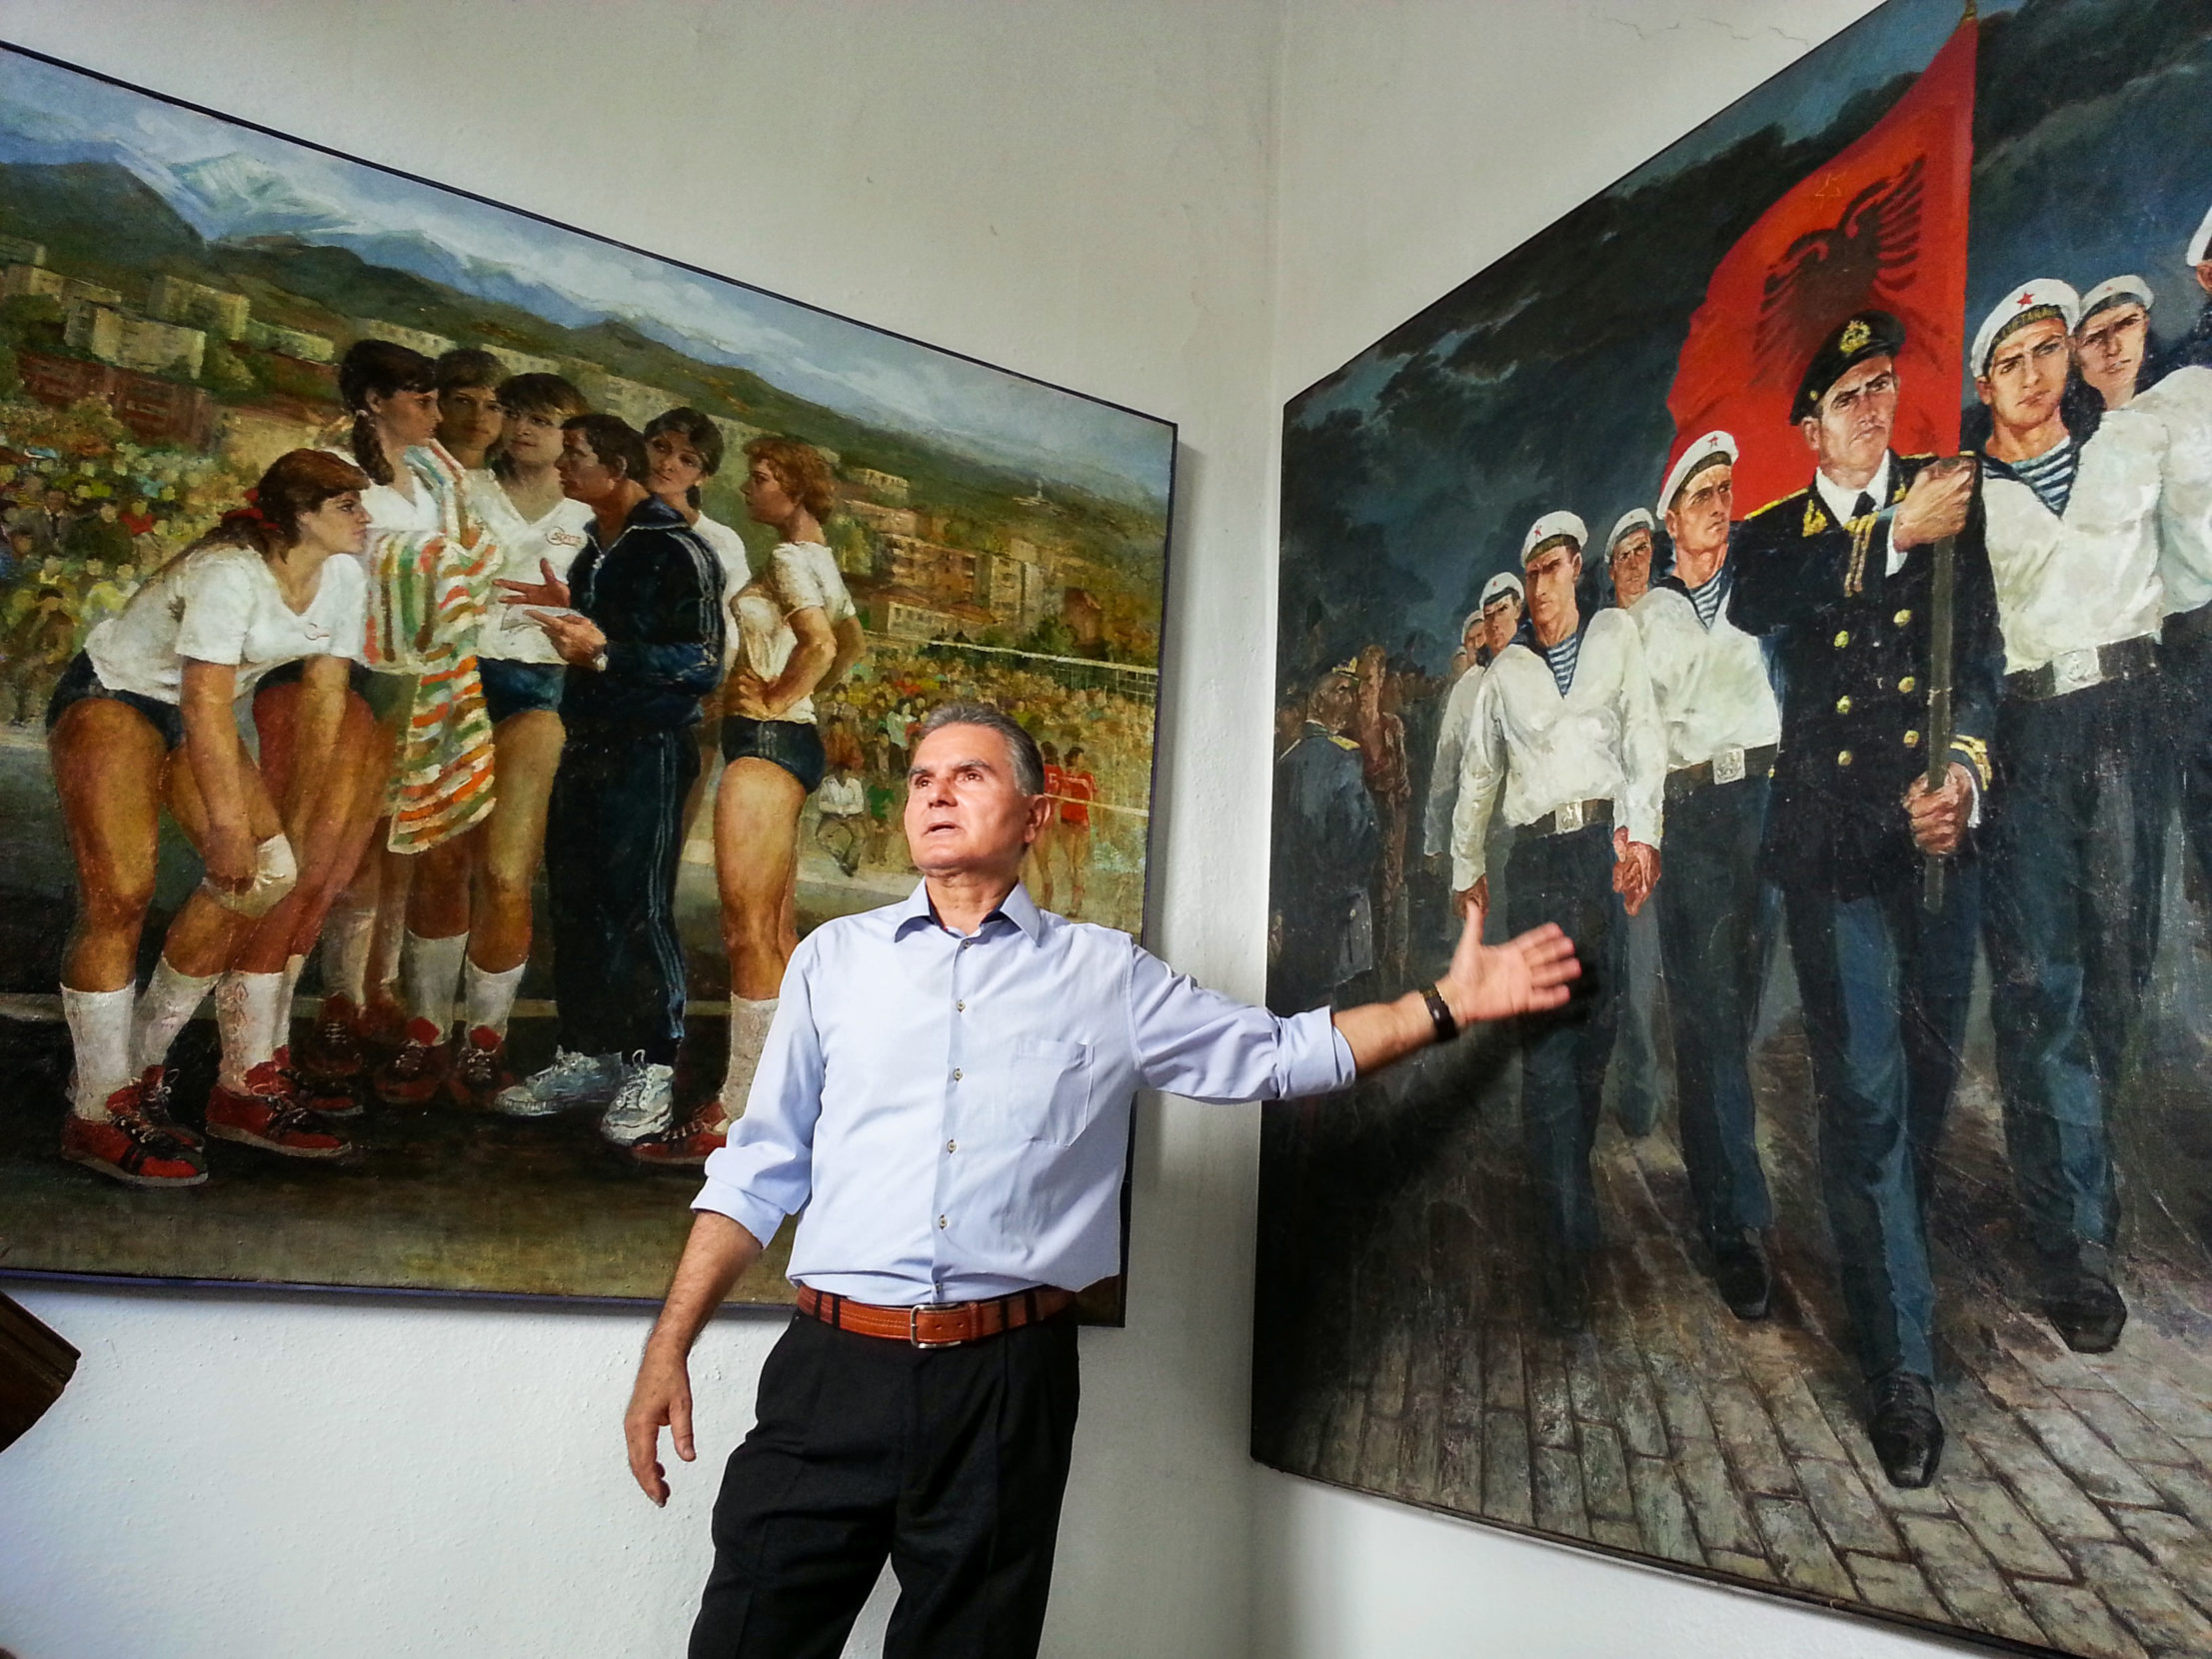 As a respected military officer during Europe’s last dictatorship, Albanian artist Robert Permeti pushed the limits of communist censorship — including modesty standards and historic details inconvenient to the regime. Photo: Edward Reeves/Drive Albania.